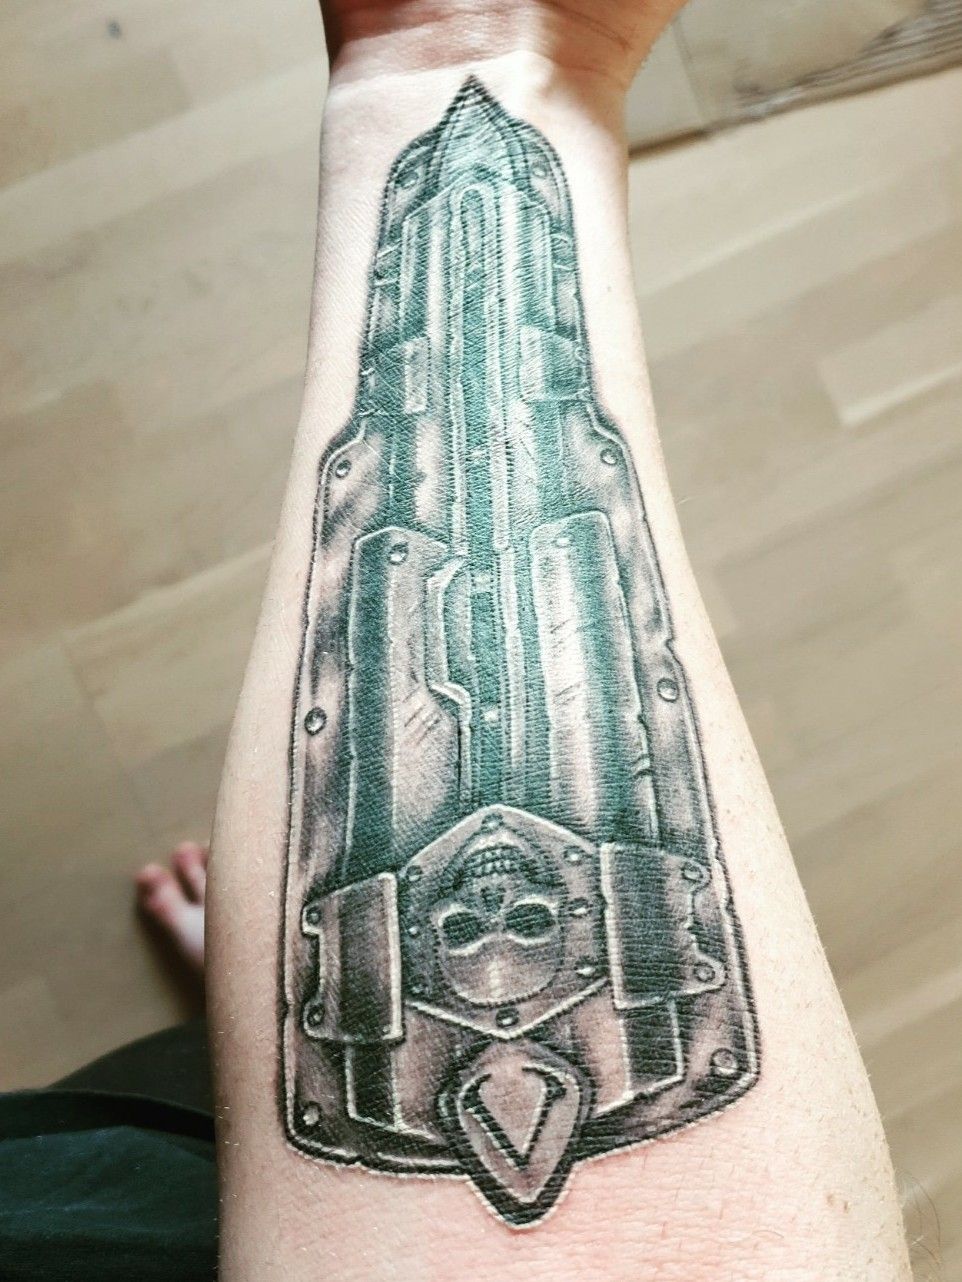 The Ones Who Came Before  on Twitter TOWCBCommunityCorner Check out  this AssassinsCreed inspired tattoo design by Canadian artist  JeanPhilippe  httpstcocwY4YUQZZk httpstcoT4d0rGVoKK  Twitter